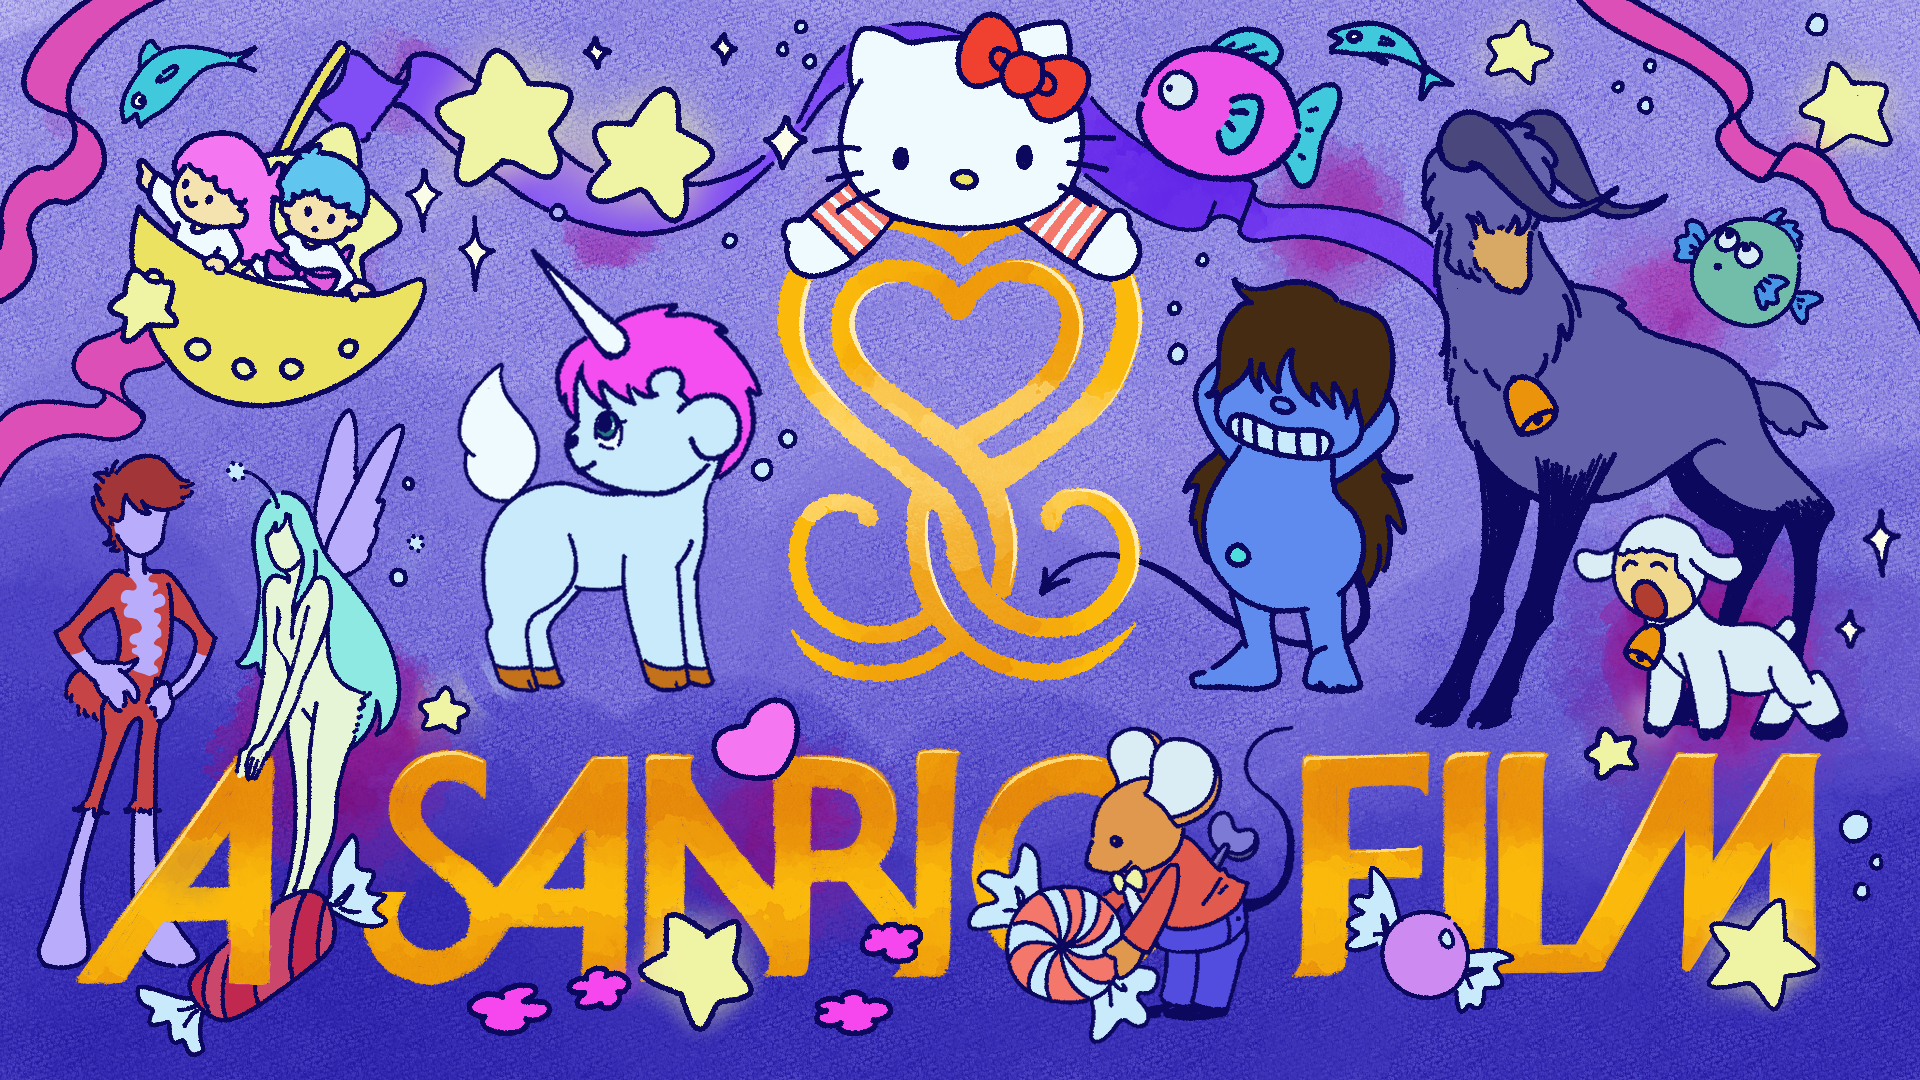 Many of Sanrio Film's many characters. Image by Kelsey Short.